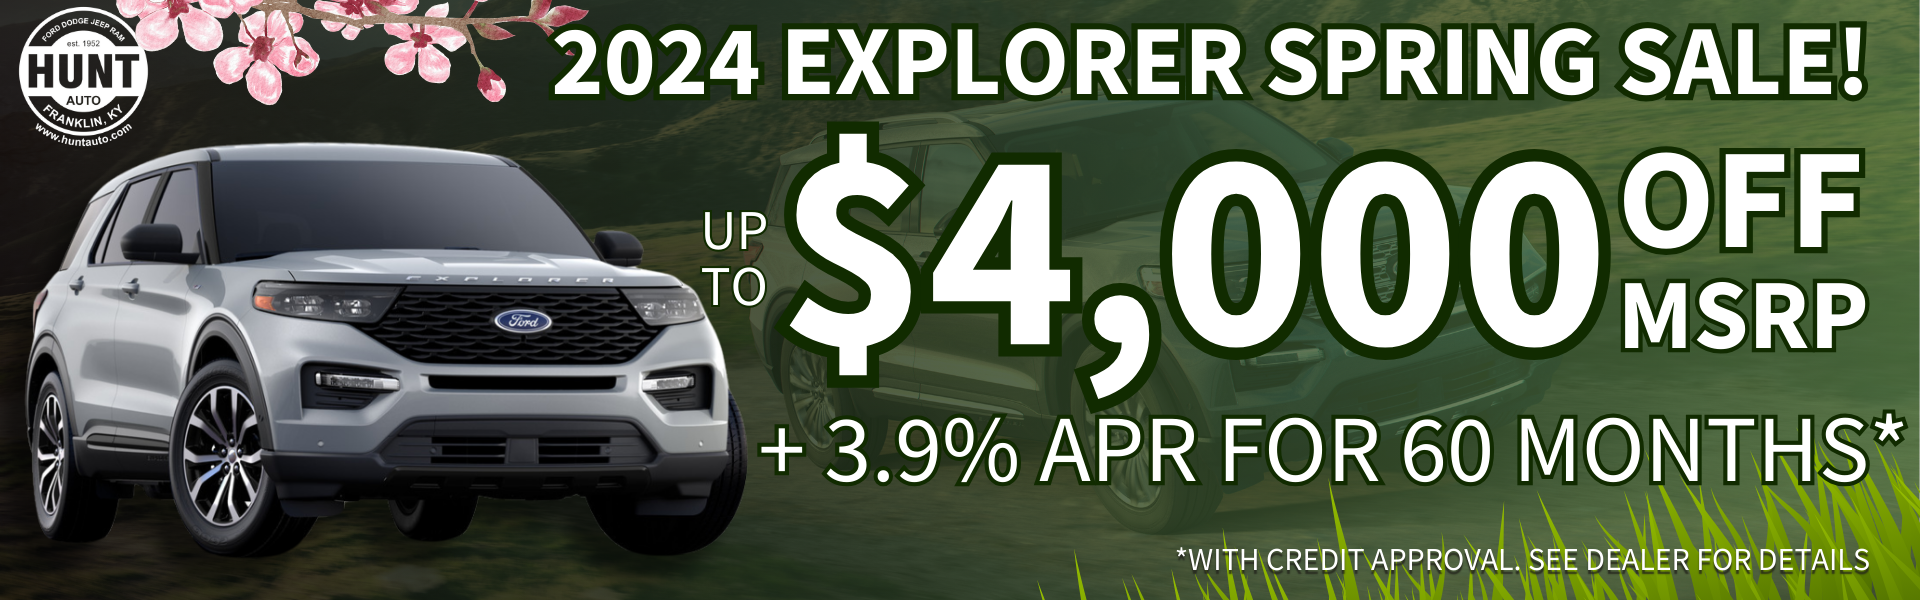 New 2024 Ford Explorers up $4,000 OFF and 3.9% for 60 Months